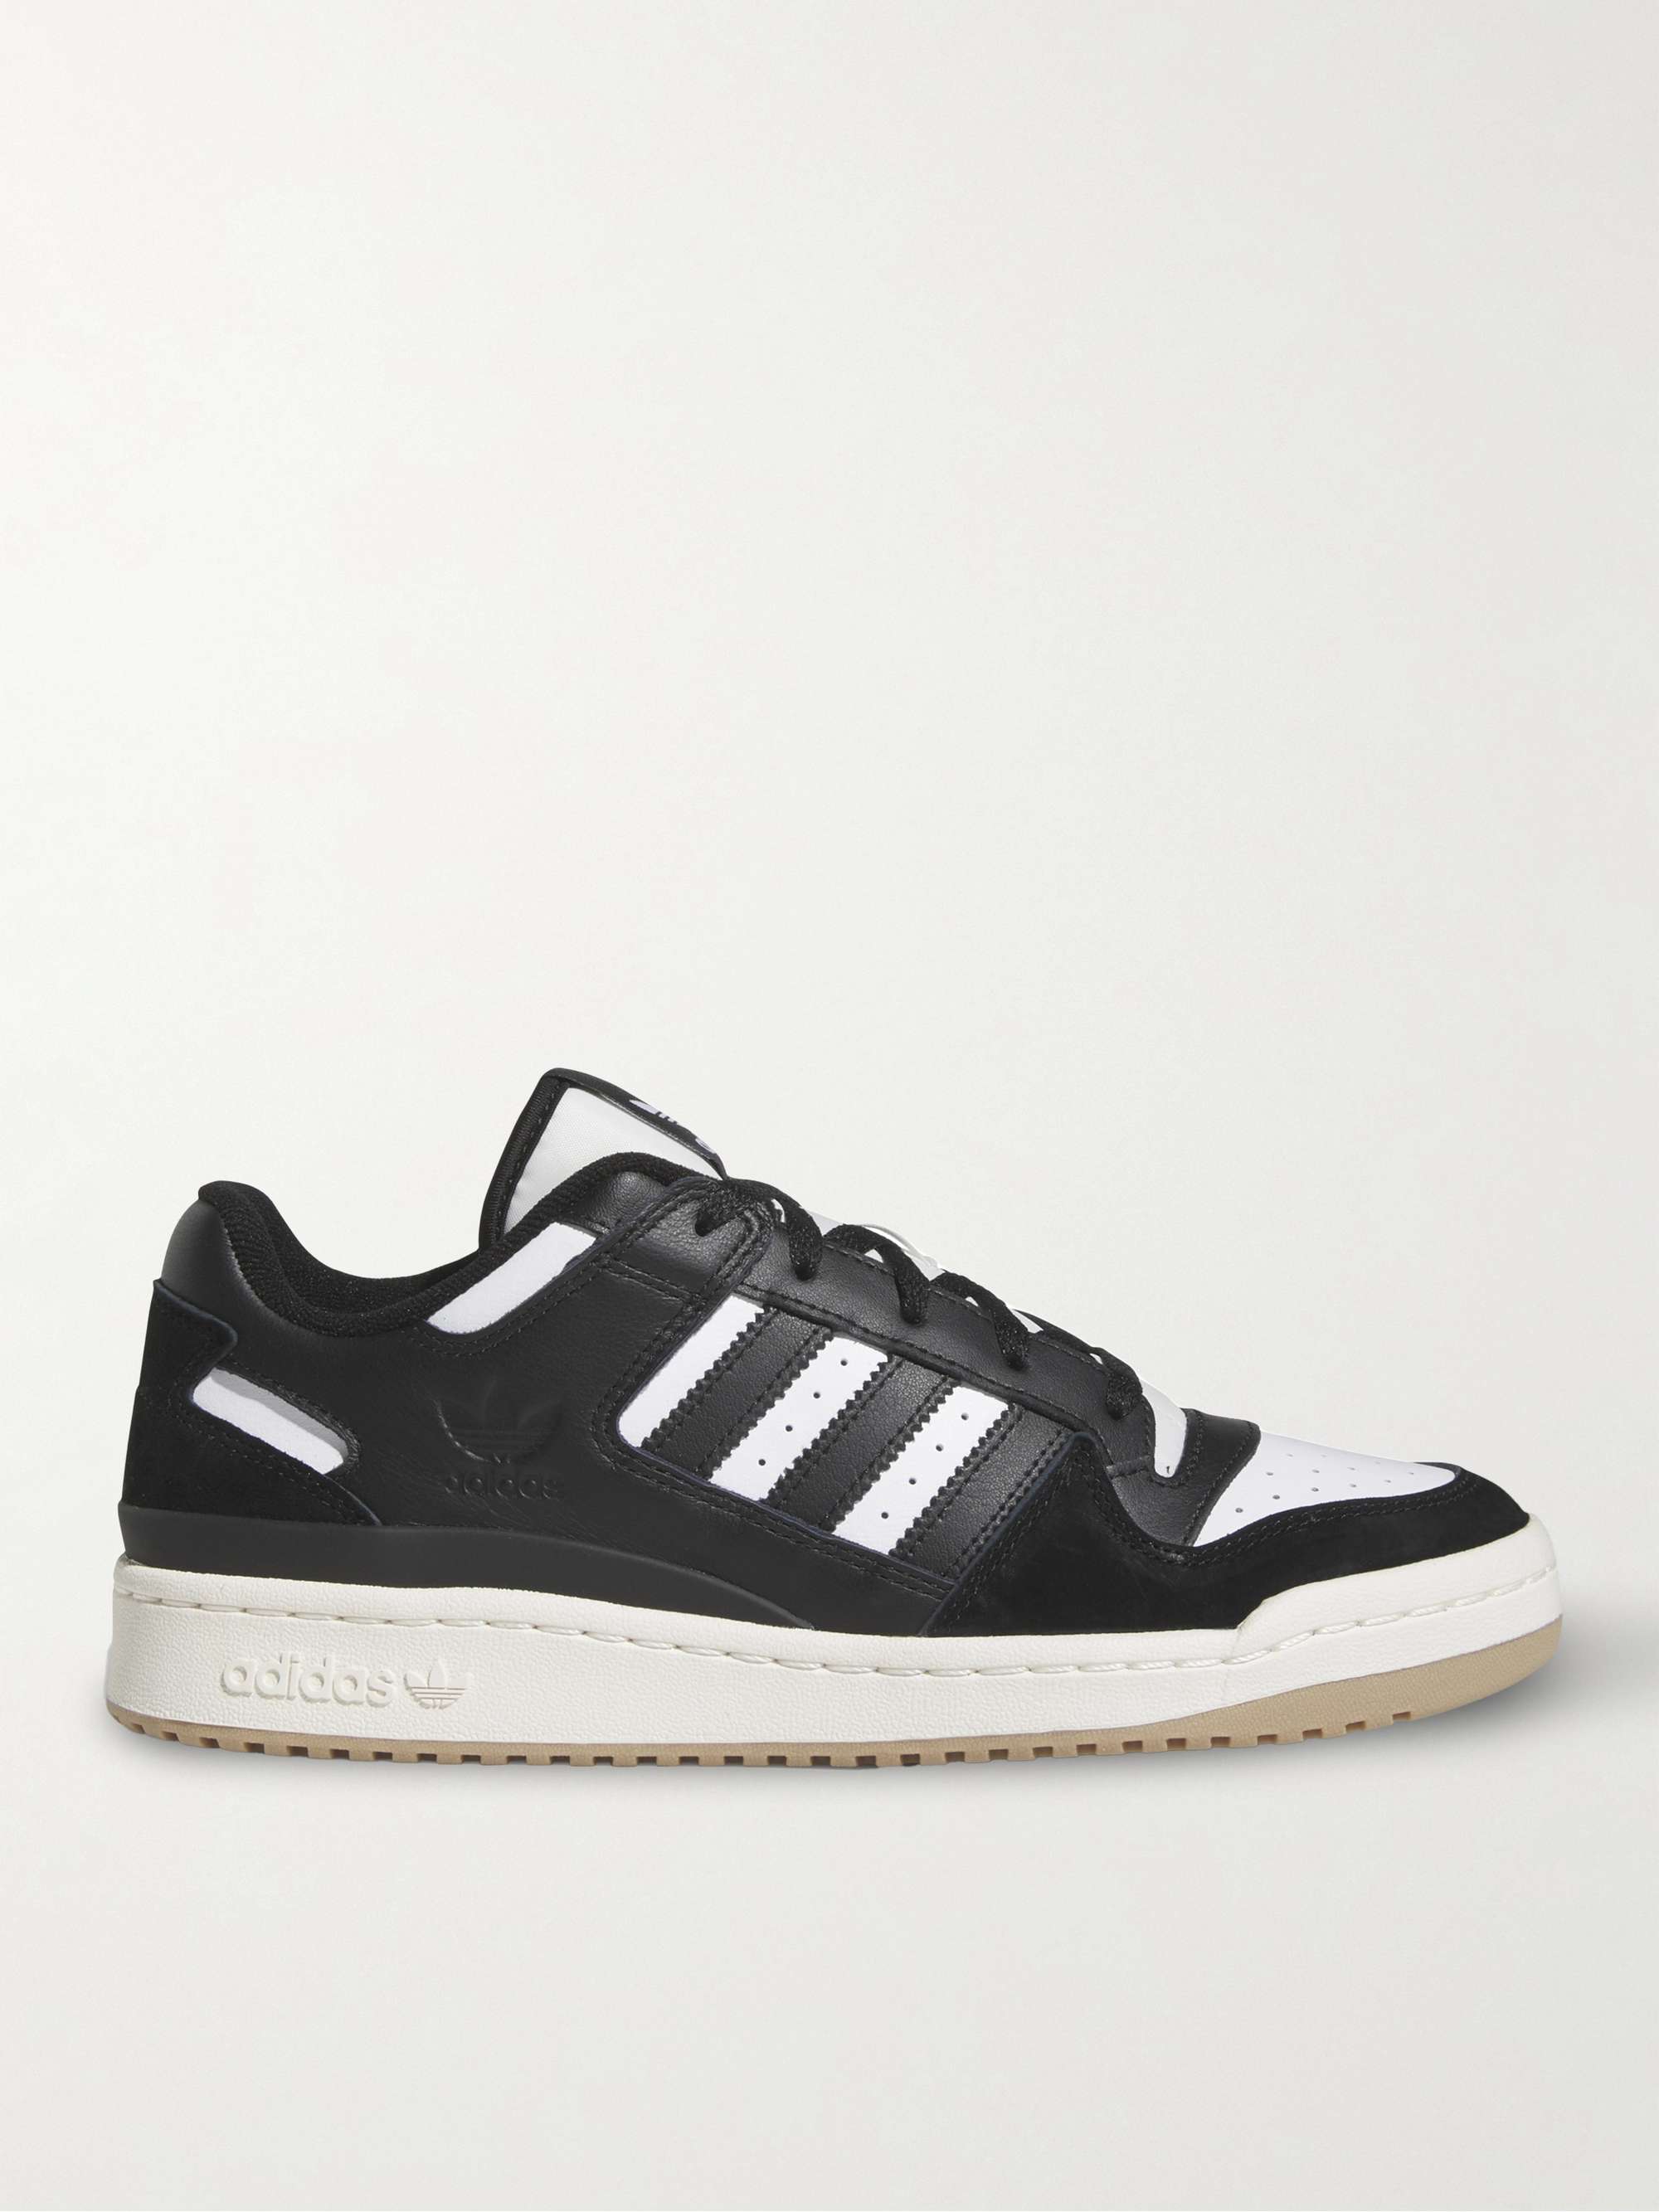 ADIDAS ORIGINALS Forum Low Suede-Trimmed Leather Sneakers | MR PORTER